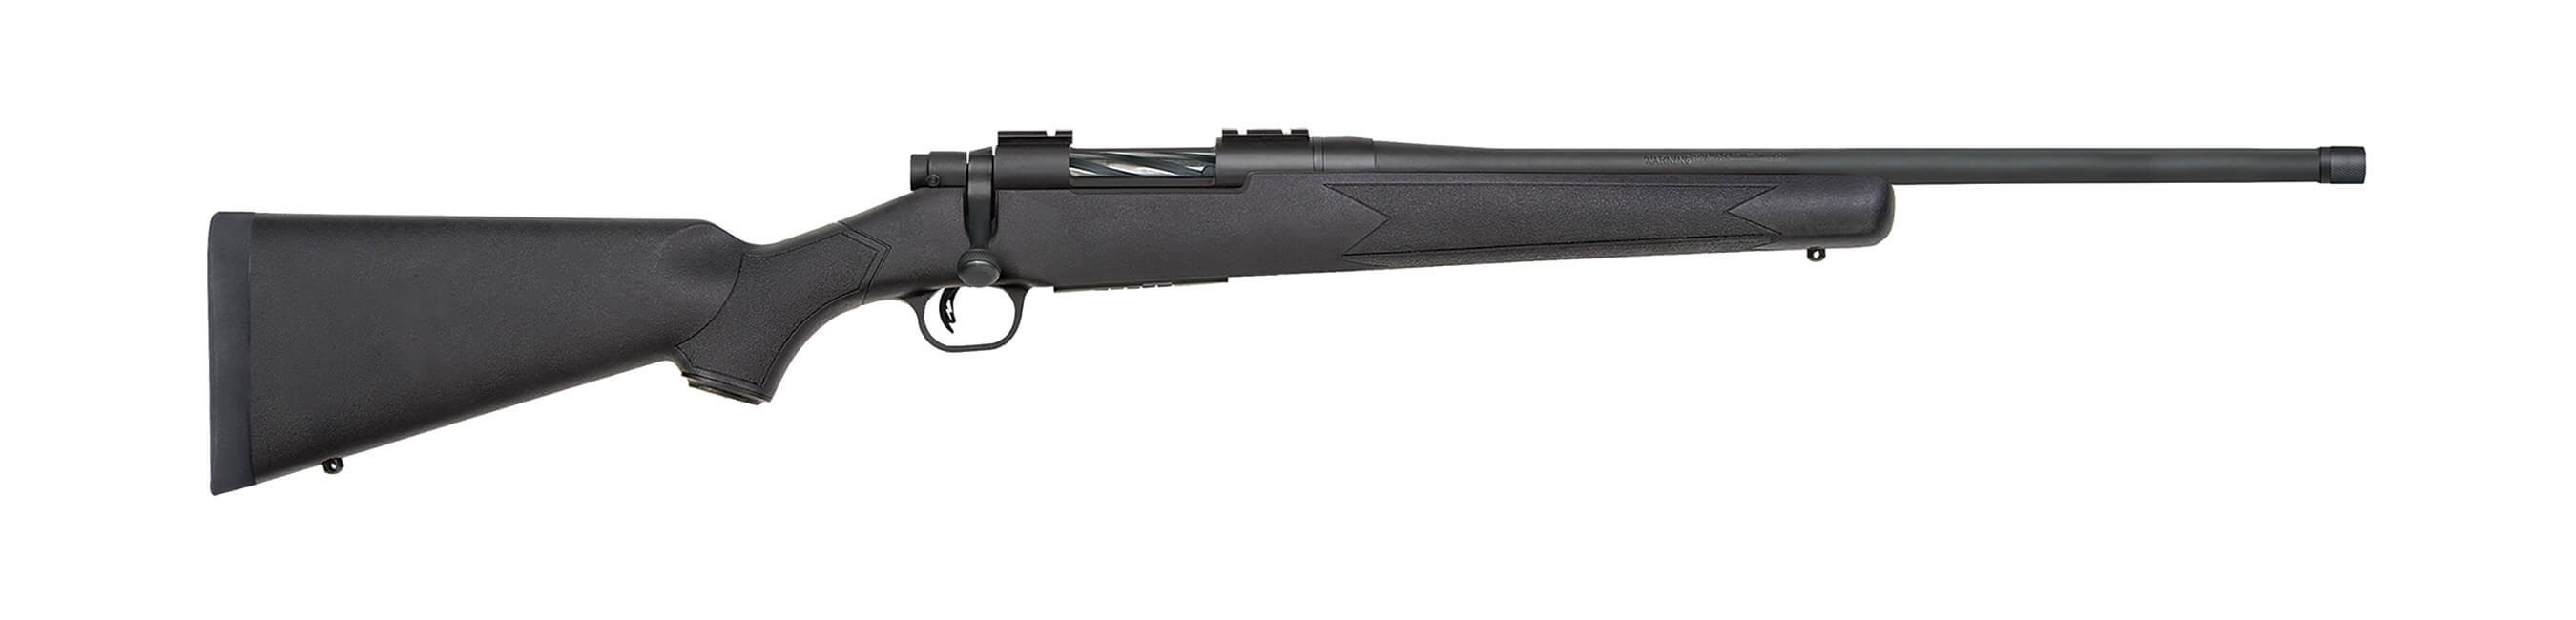 RIFLE MOSSBERG PATRIOT SYNTHETIC CALIBRE .300 WIN MAG